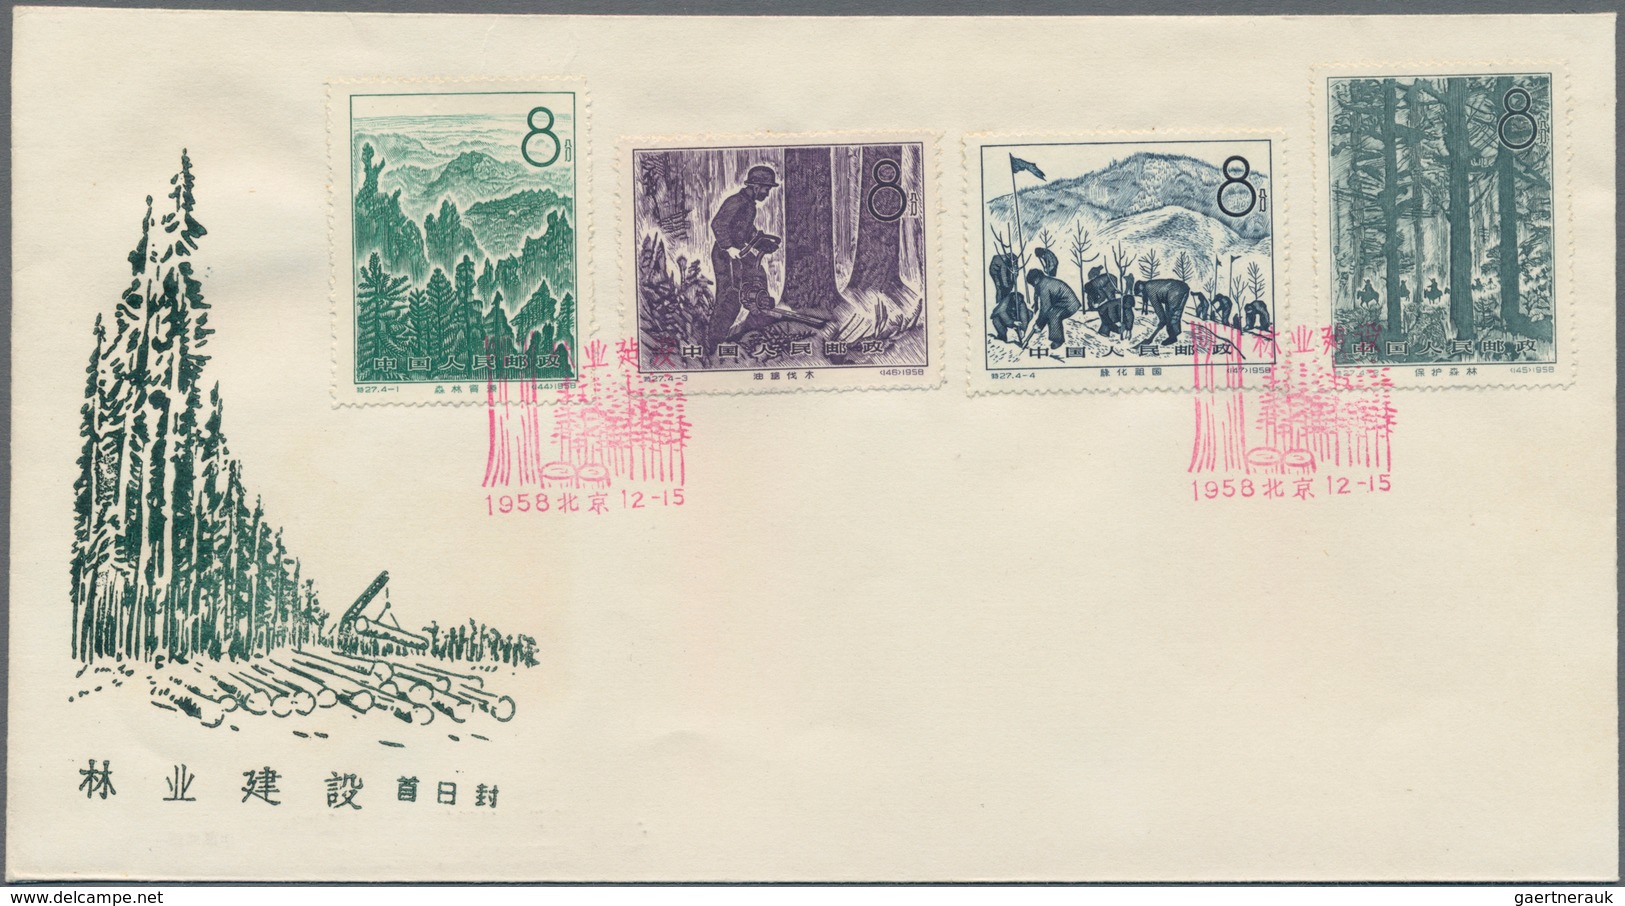 China - Volksrepublik: 1958, 5 FDCs, bearing Michel 413/429 (C57, S27, S28, S29, S30), tied by first